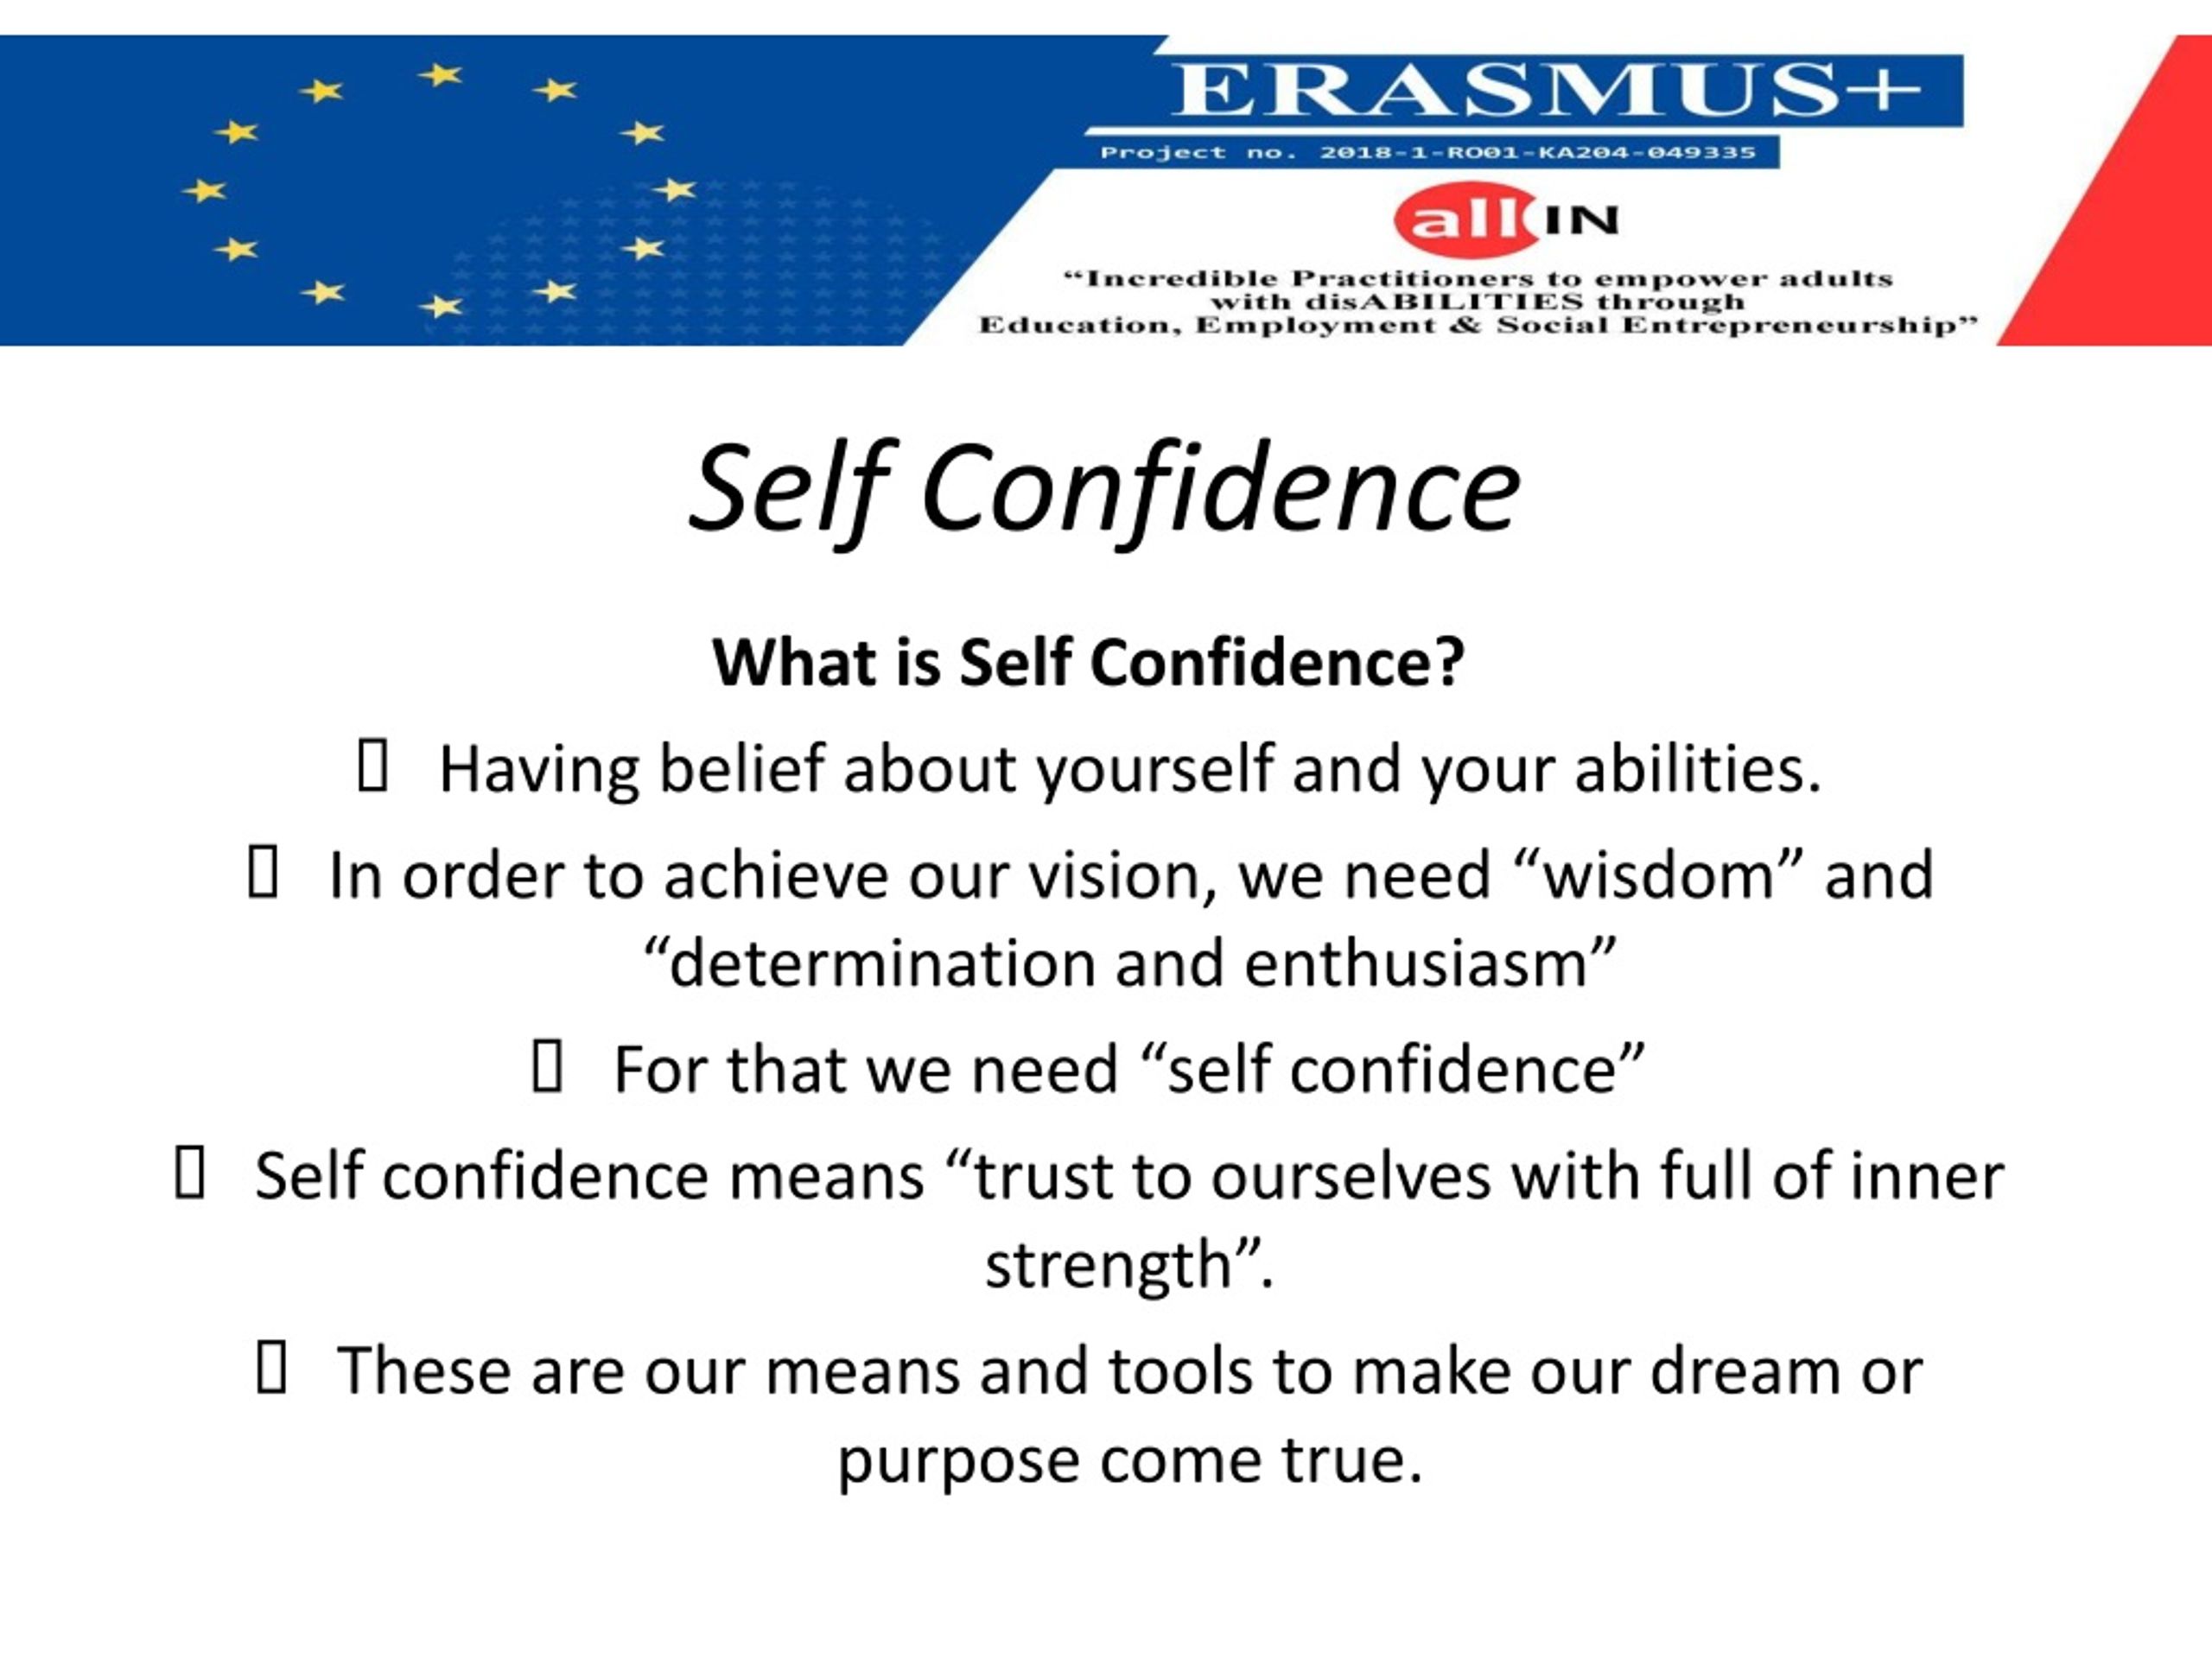 self confidence powerpoint presentation download